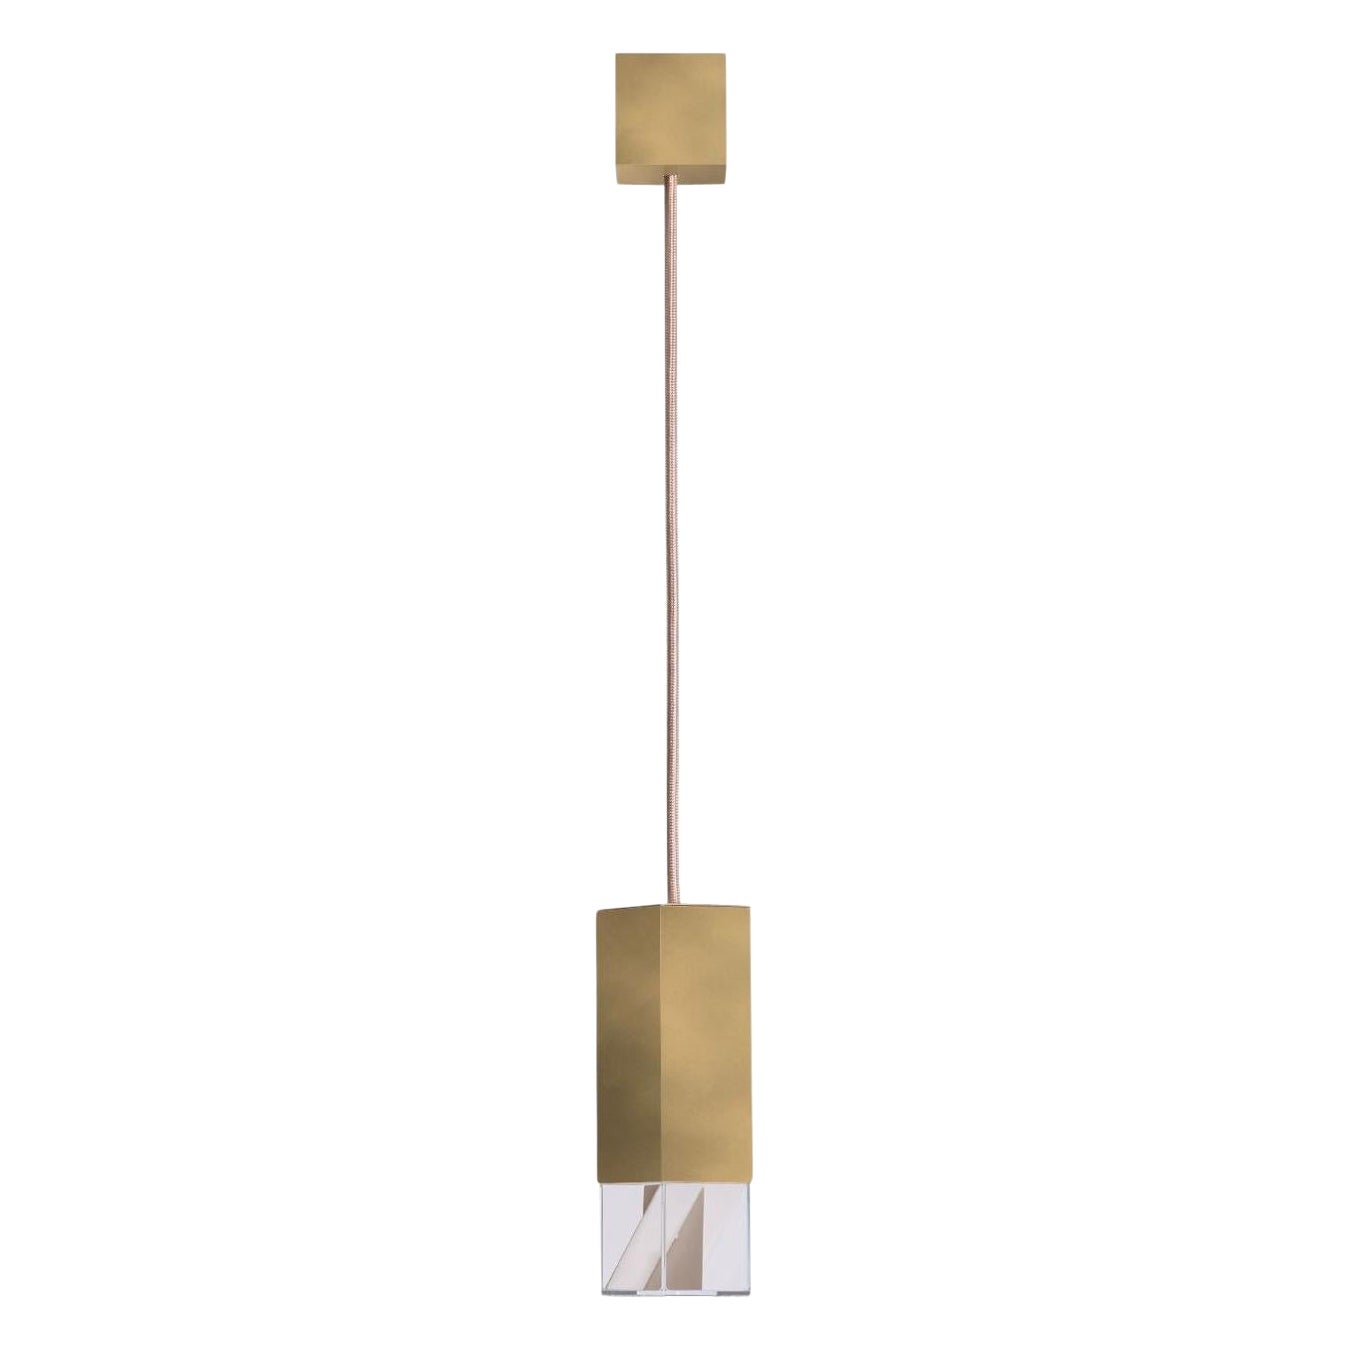 Lamp One Brass 02 Revamp Edition by Formaminima